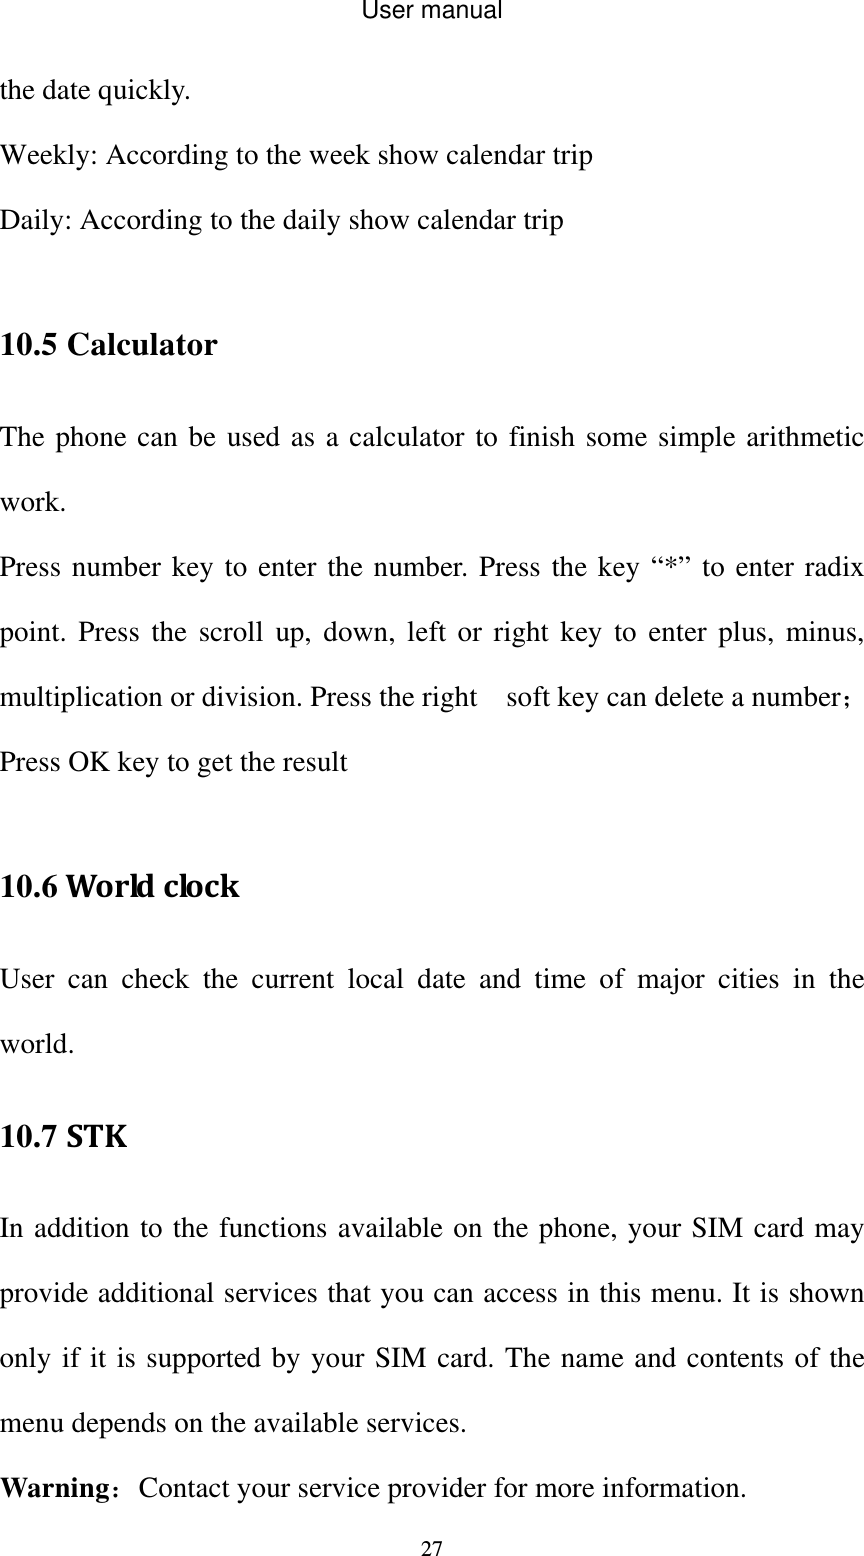 User manual  27the date quickly. Weekly: According to the week show calendar trip Daily: According to the daily show calendar trip  10.5 Calculator The phone can be used as a calculator to finish some simple arithmetic work. Press number key to enter the number. Press the key “*” to enter radix point. Press the scroll up, down, left or right key to enter plus, minus, multiplication or division. Press the right    soft key can delete a number；Press OK key to get the result  10.6WorldclockUser can check the current local date and time of major cities in the world. 10.7 STKIn addition to the functions available on the phone, your SIM card may provide additional services that you can access in this menu. It is shown only if it is supported by your SIM card. The name and contents of the menu depends on the available services. Warning：Contact your service provider for more information. 